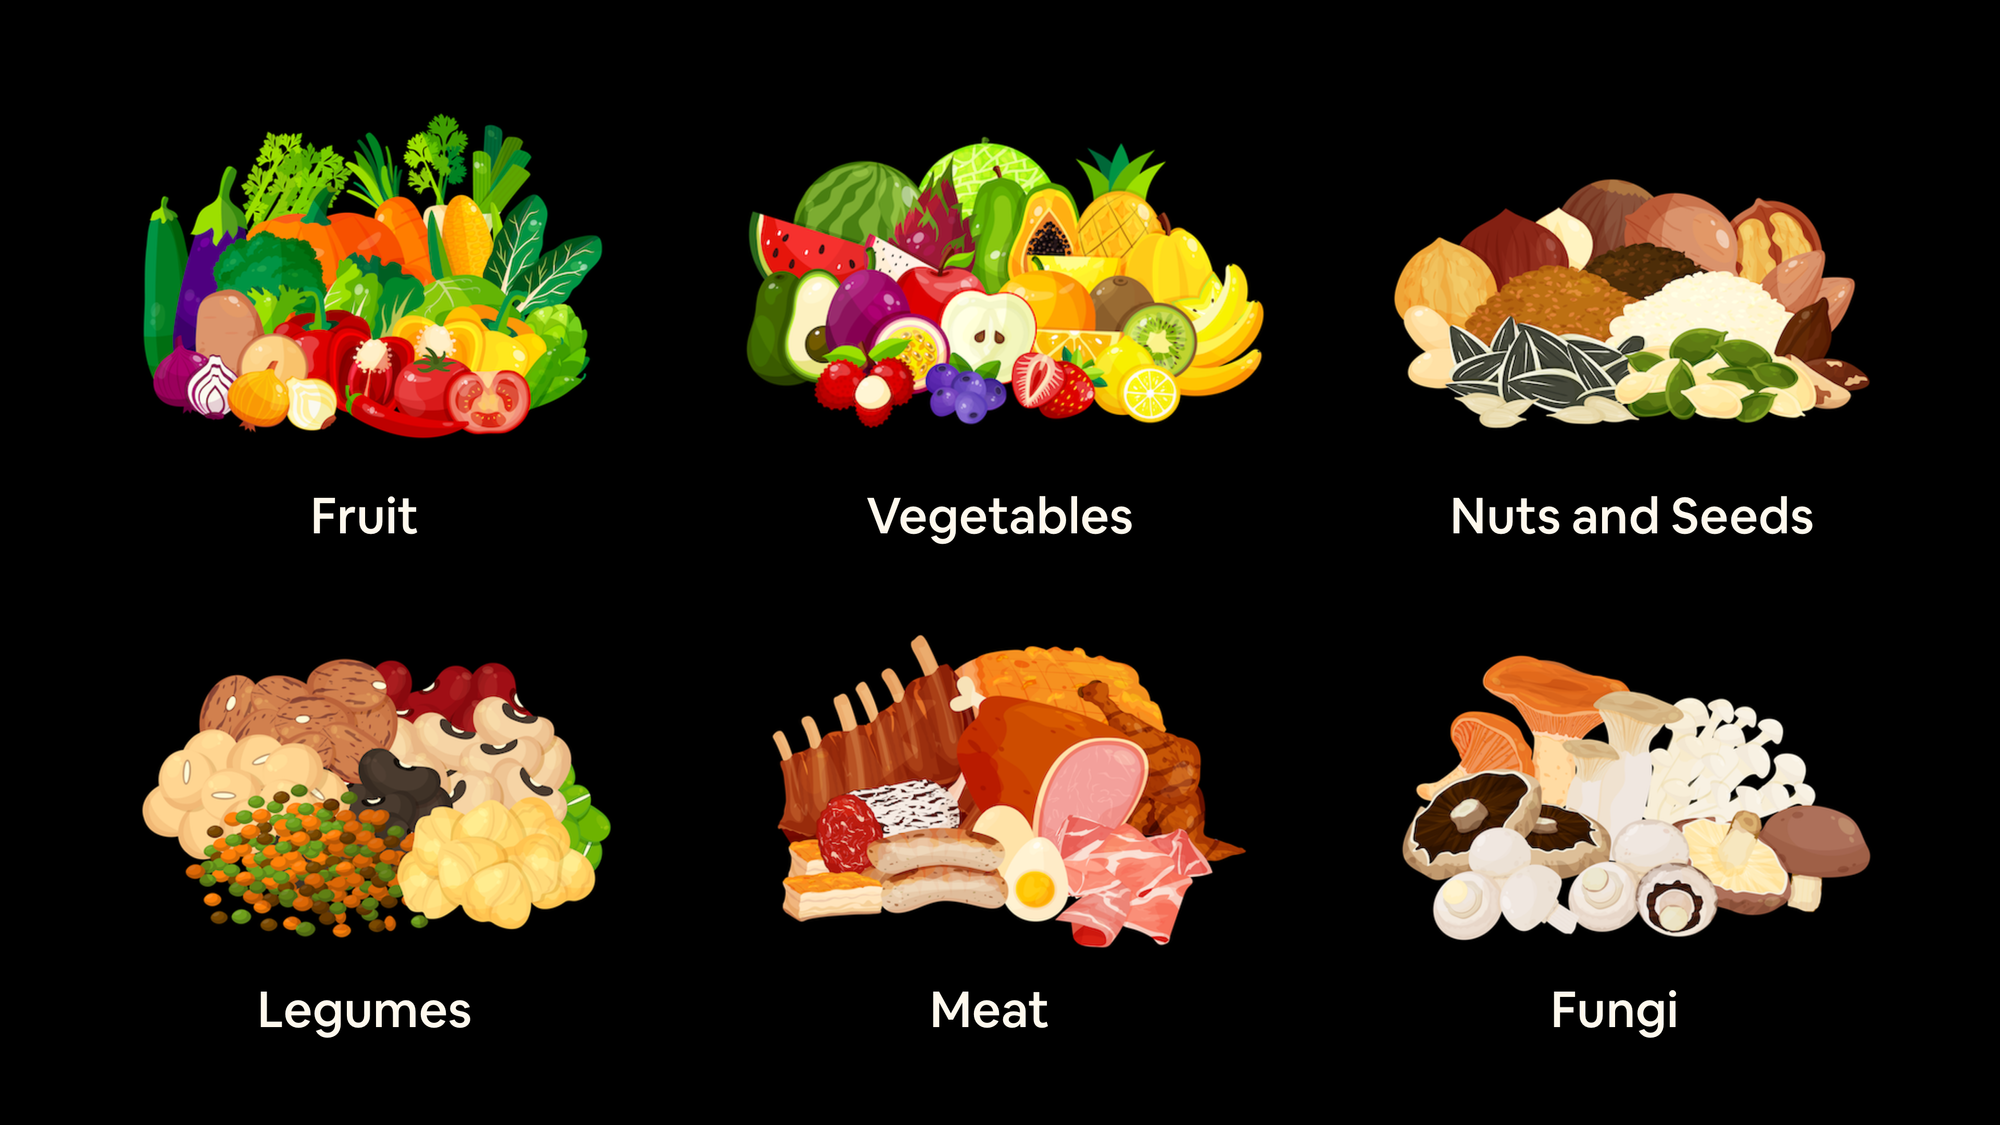 An arrangement of different food icons for different food categories